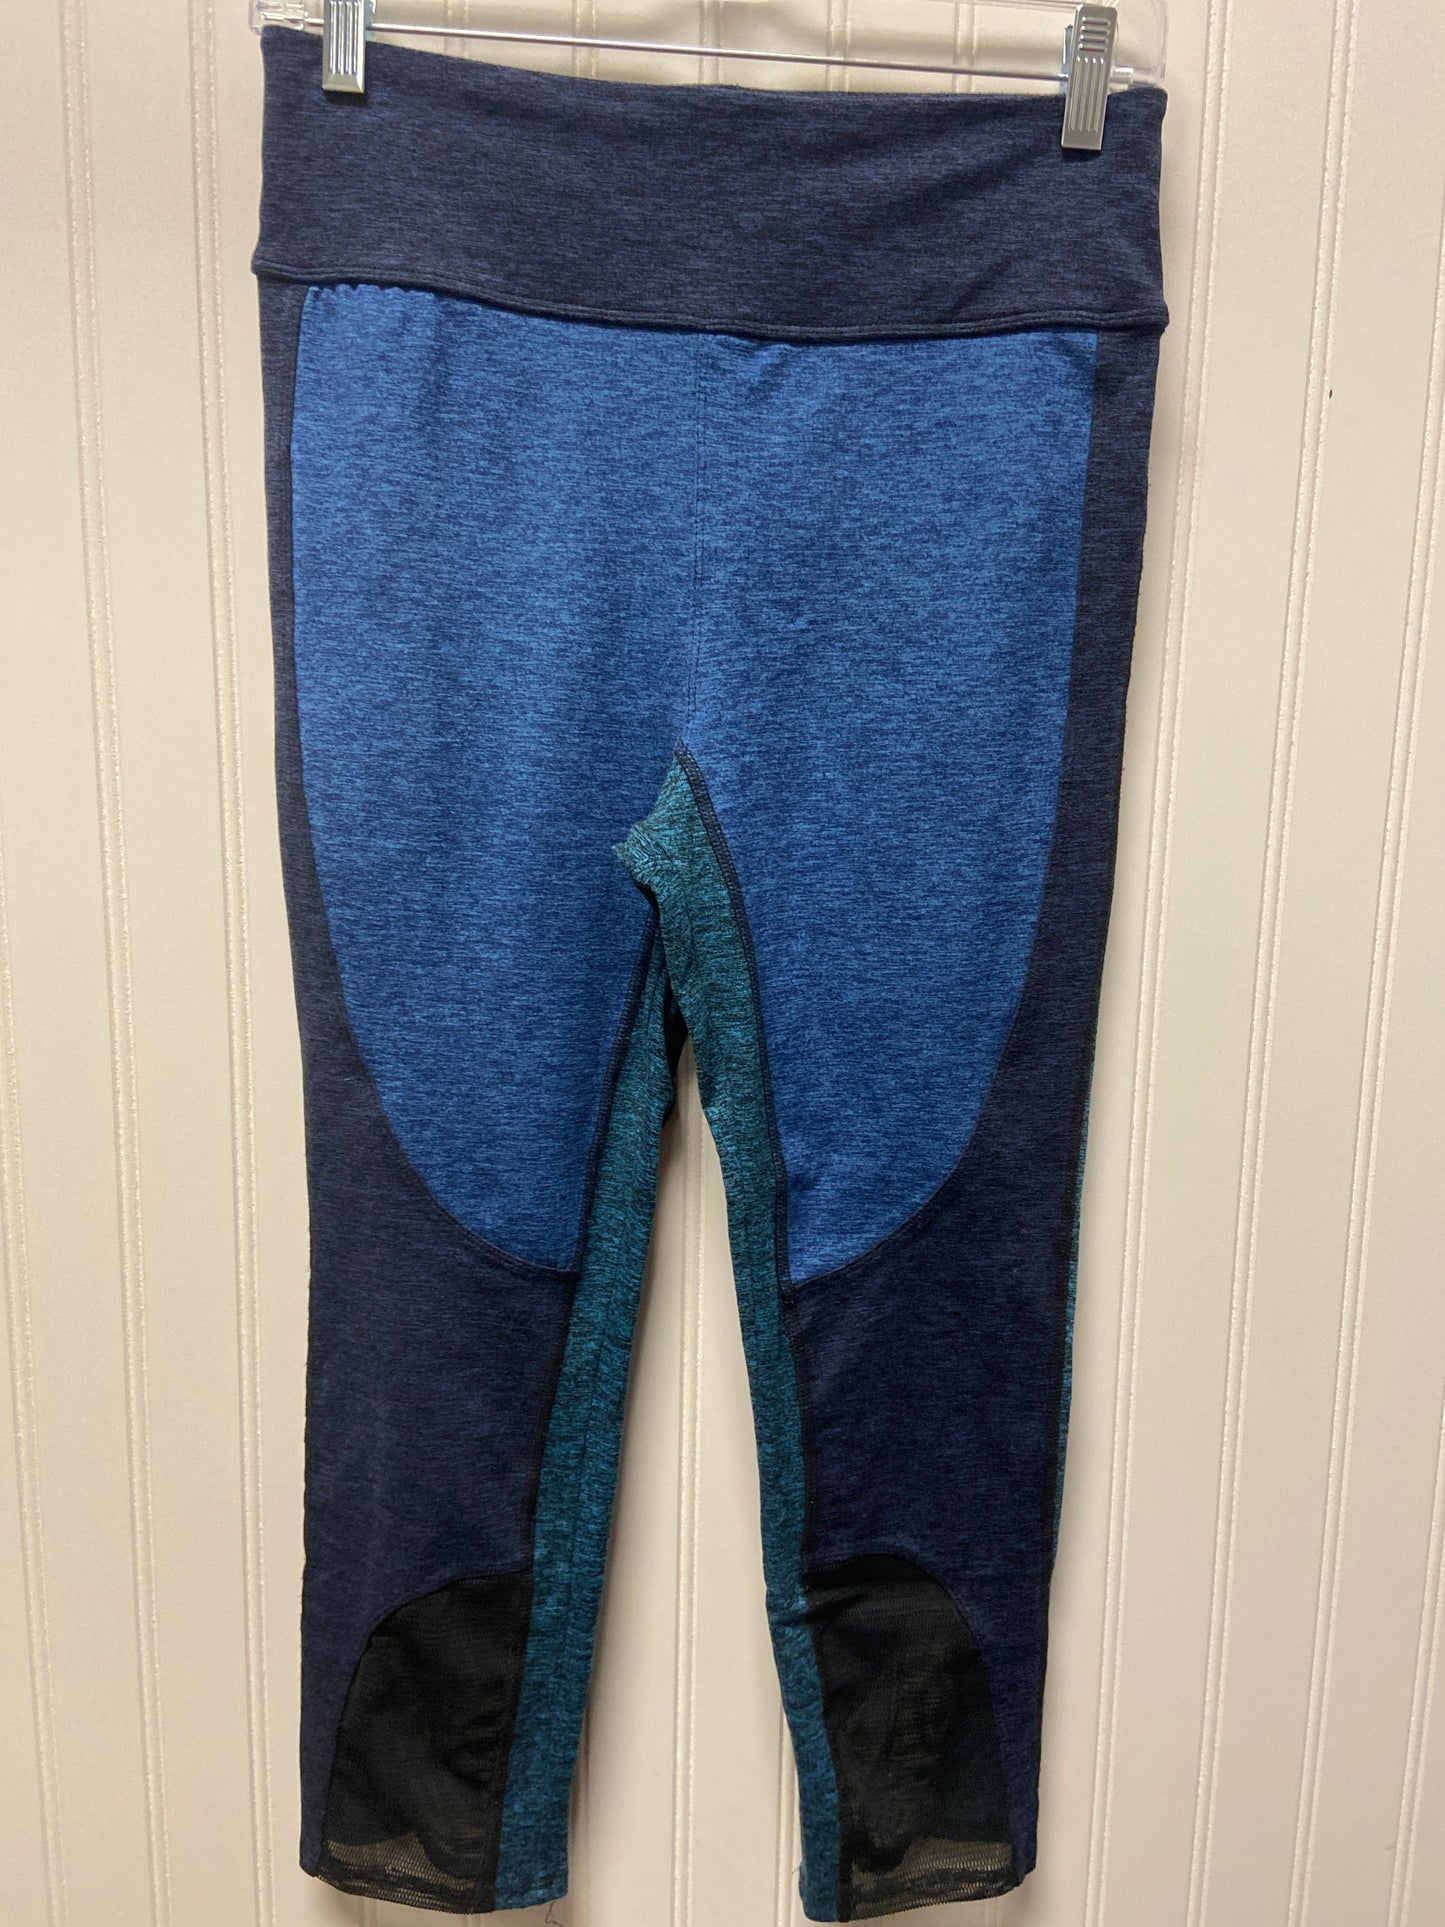 Blue Athletic Leggings Free People, Size S